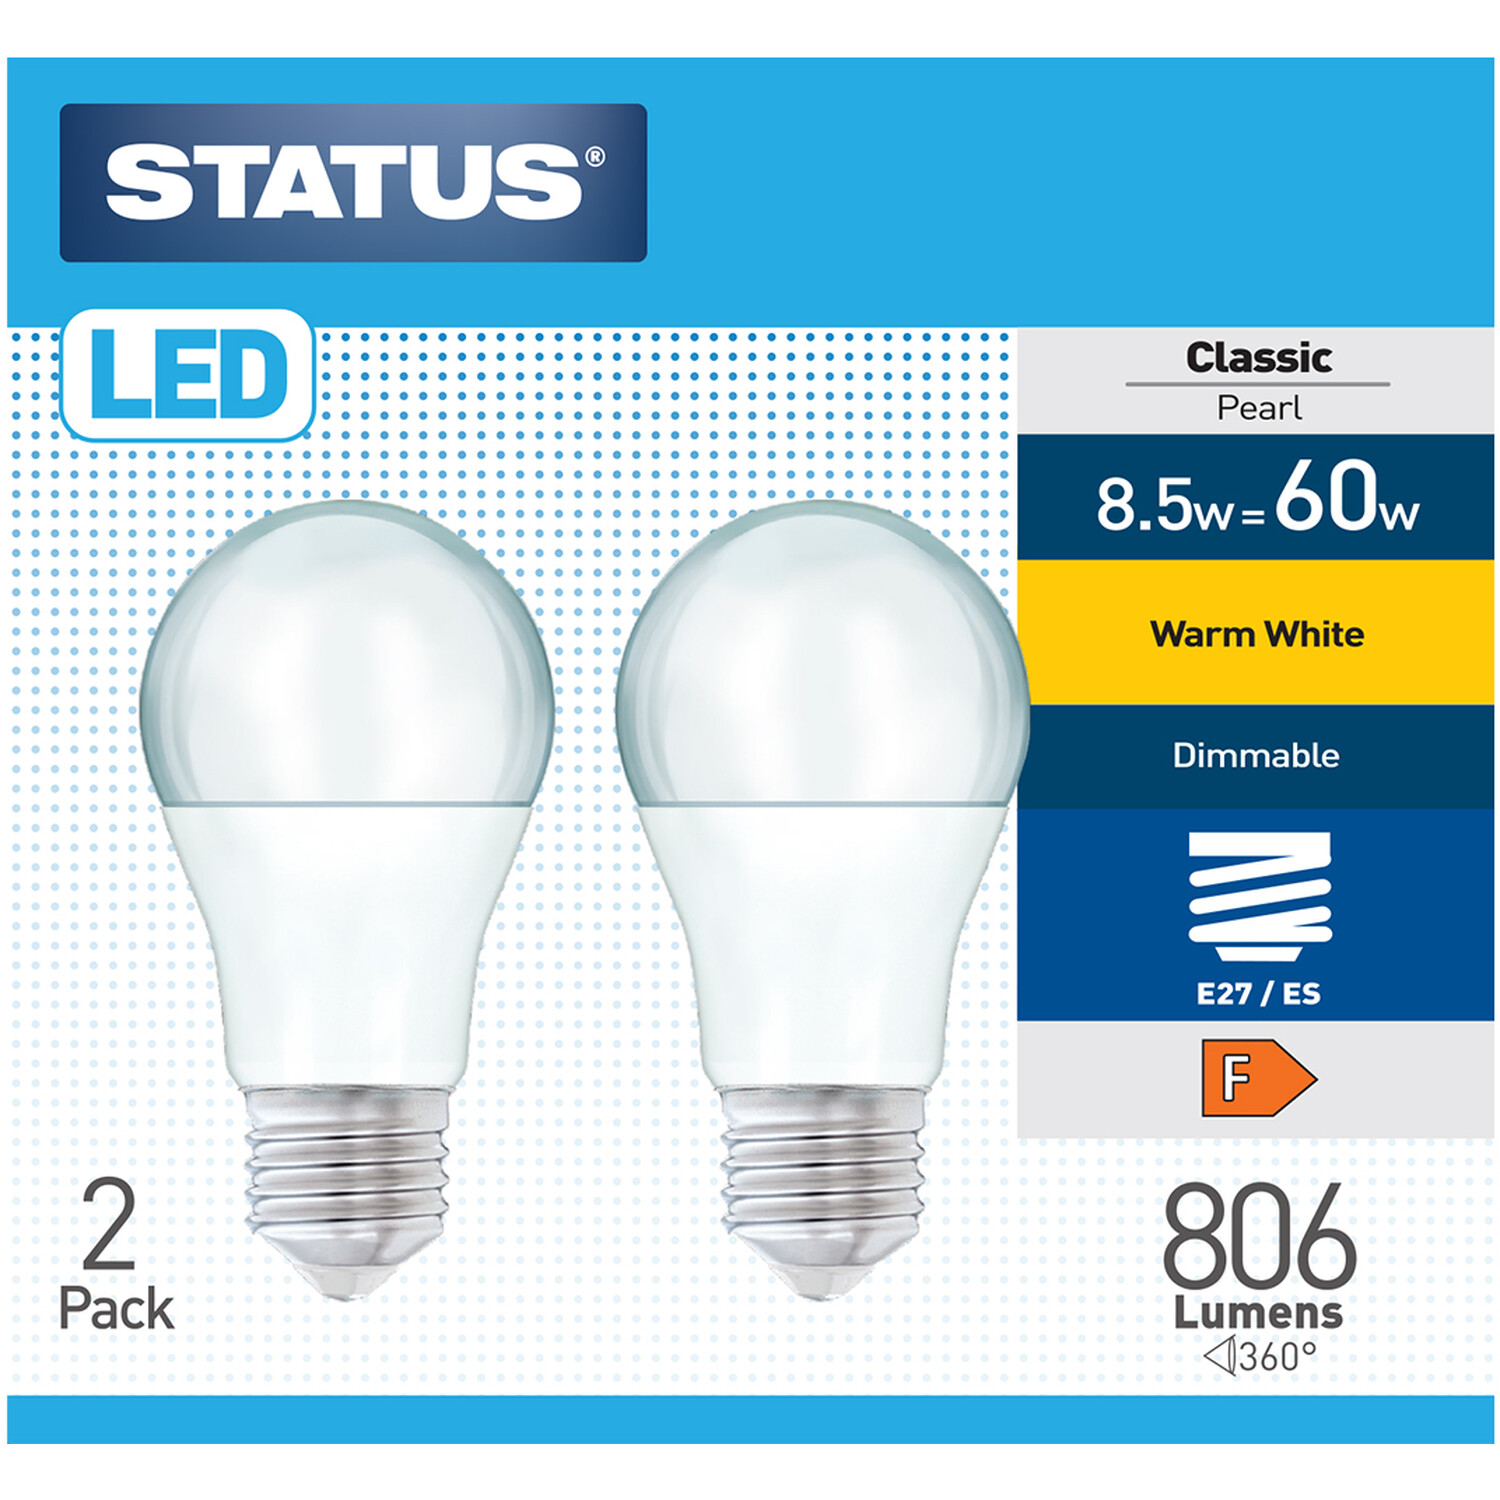 Pack of 2 Status Warm White Dimmable Classic Pearl Lightbulbs - Edison Screw / ES Image 1